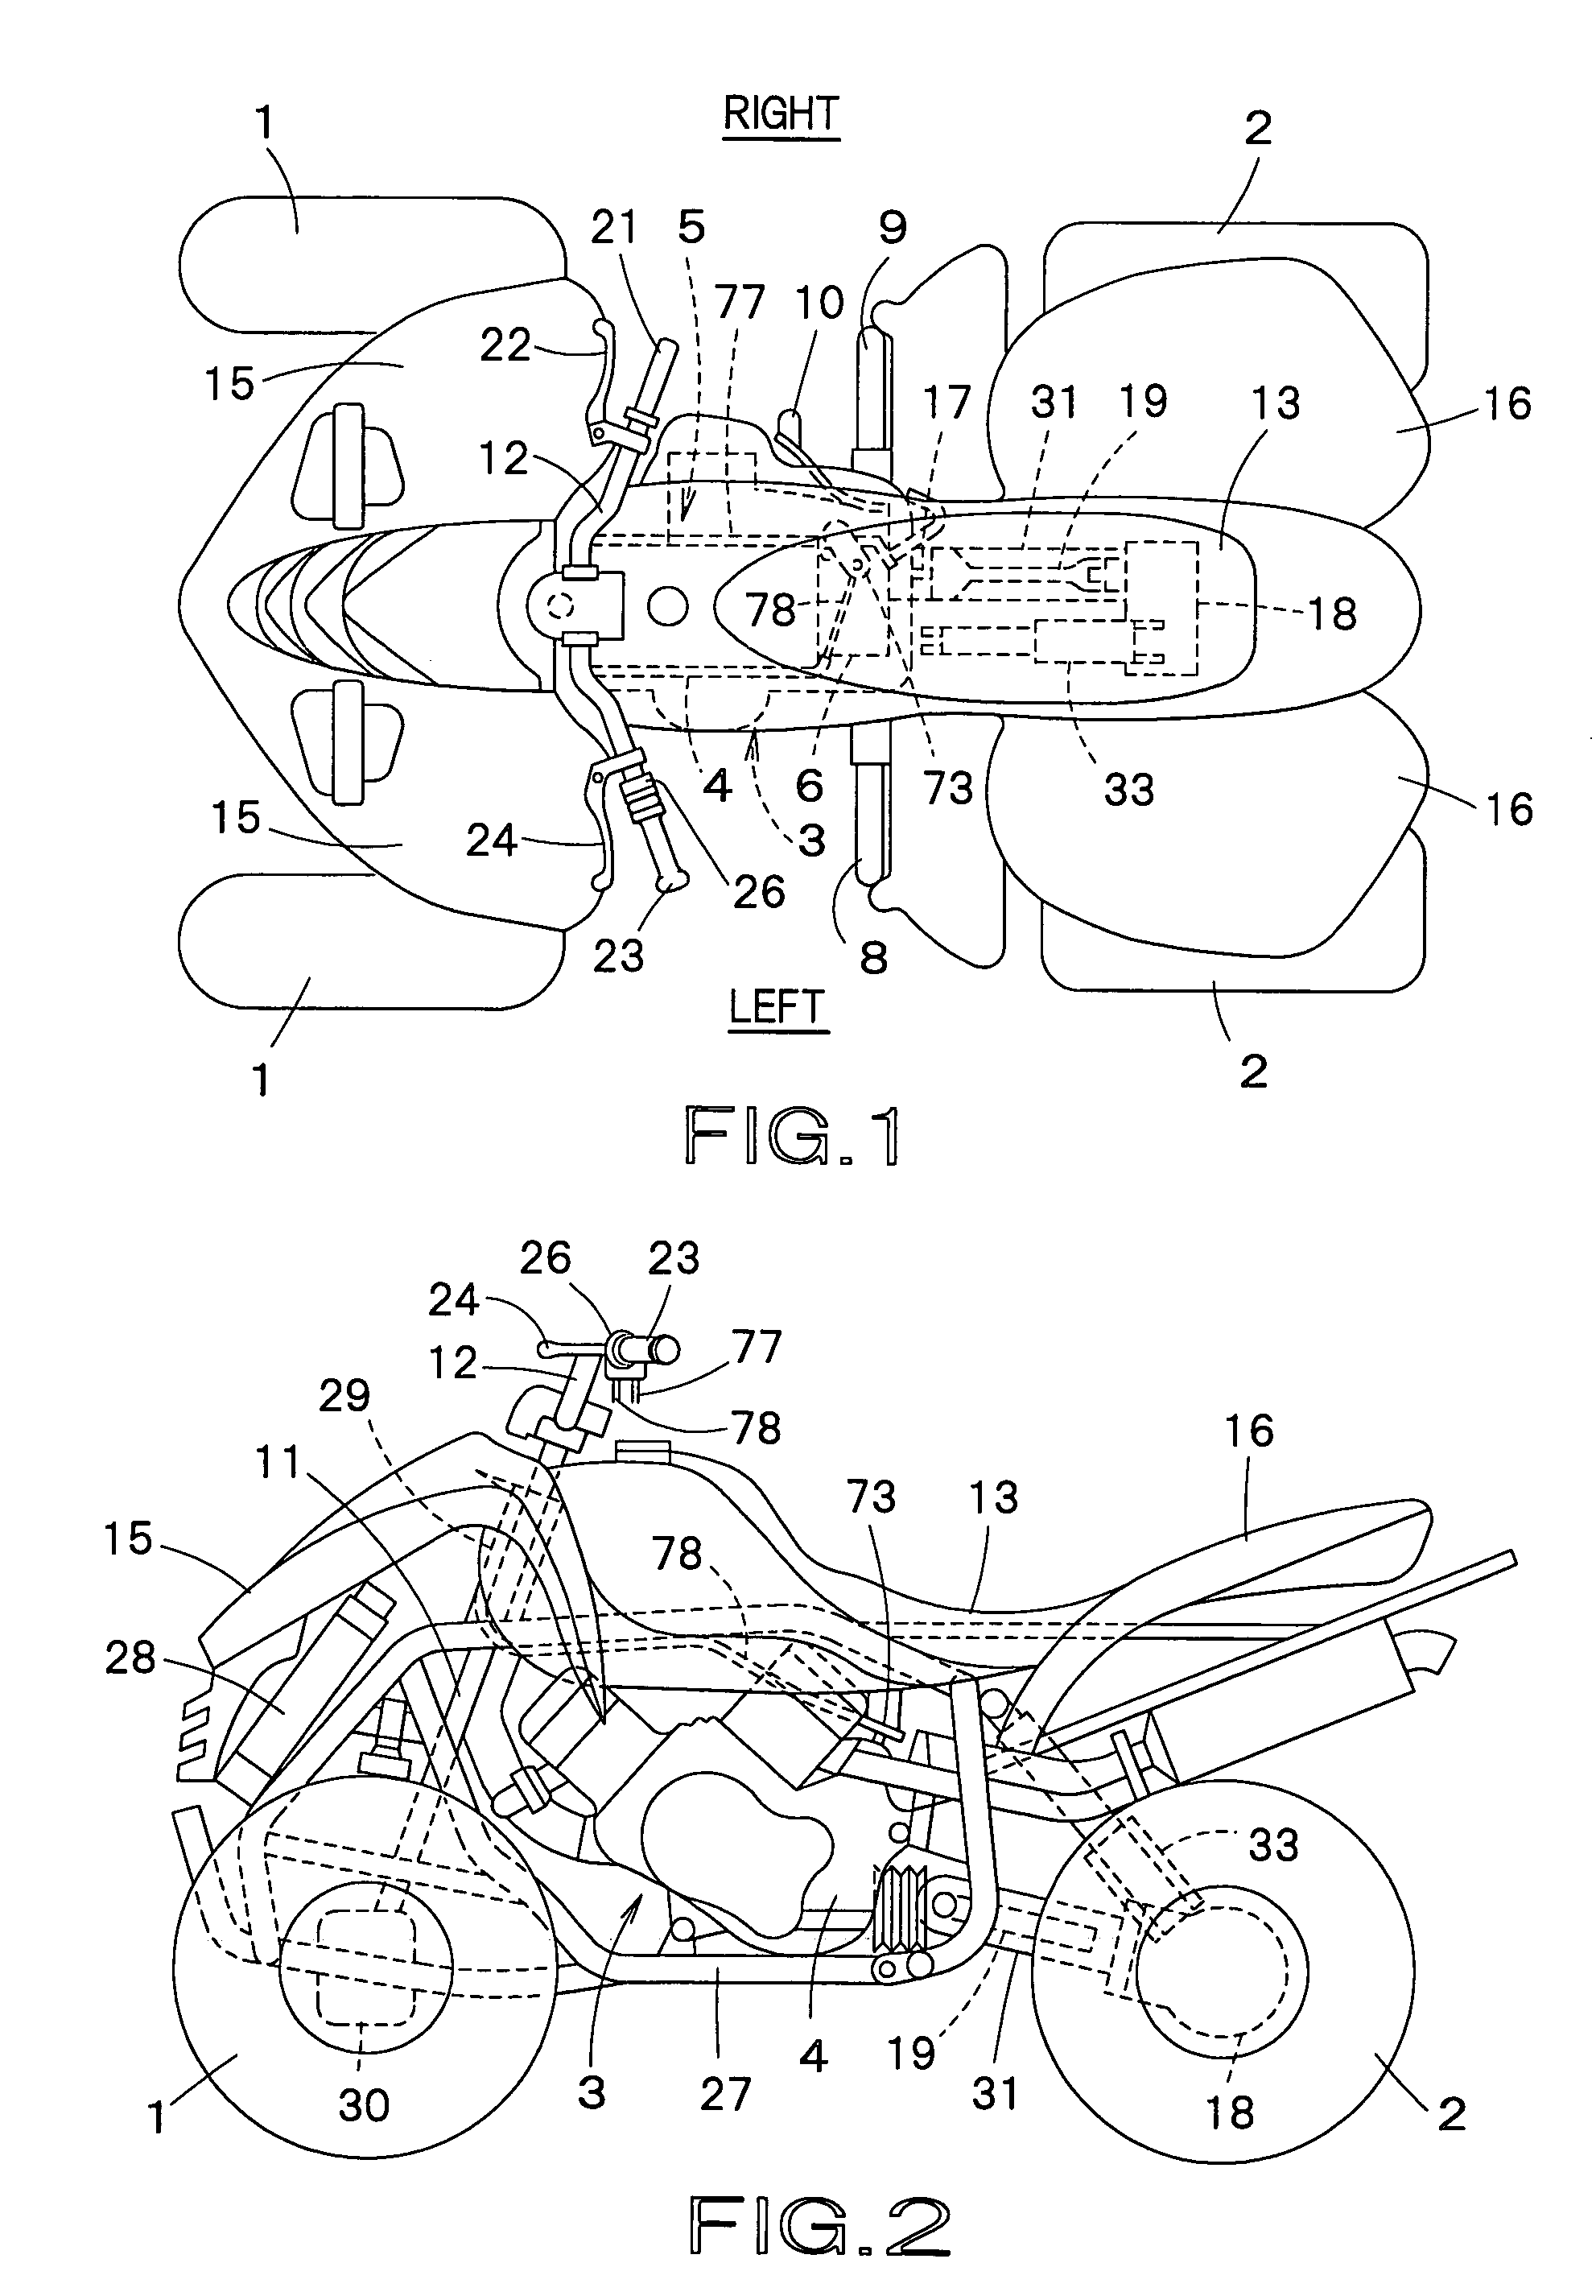 Transmission apparatus of all-terrain vehicle